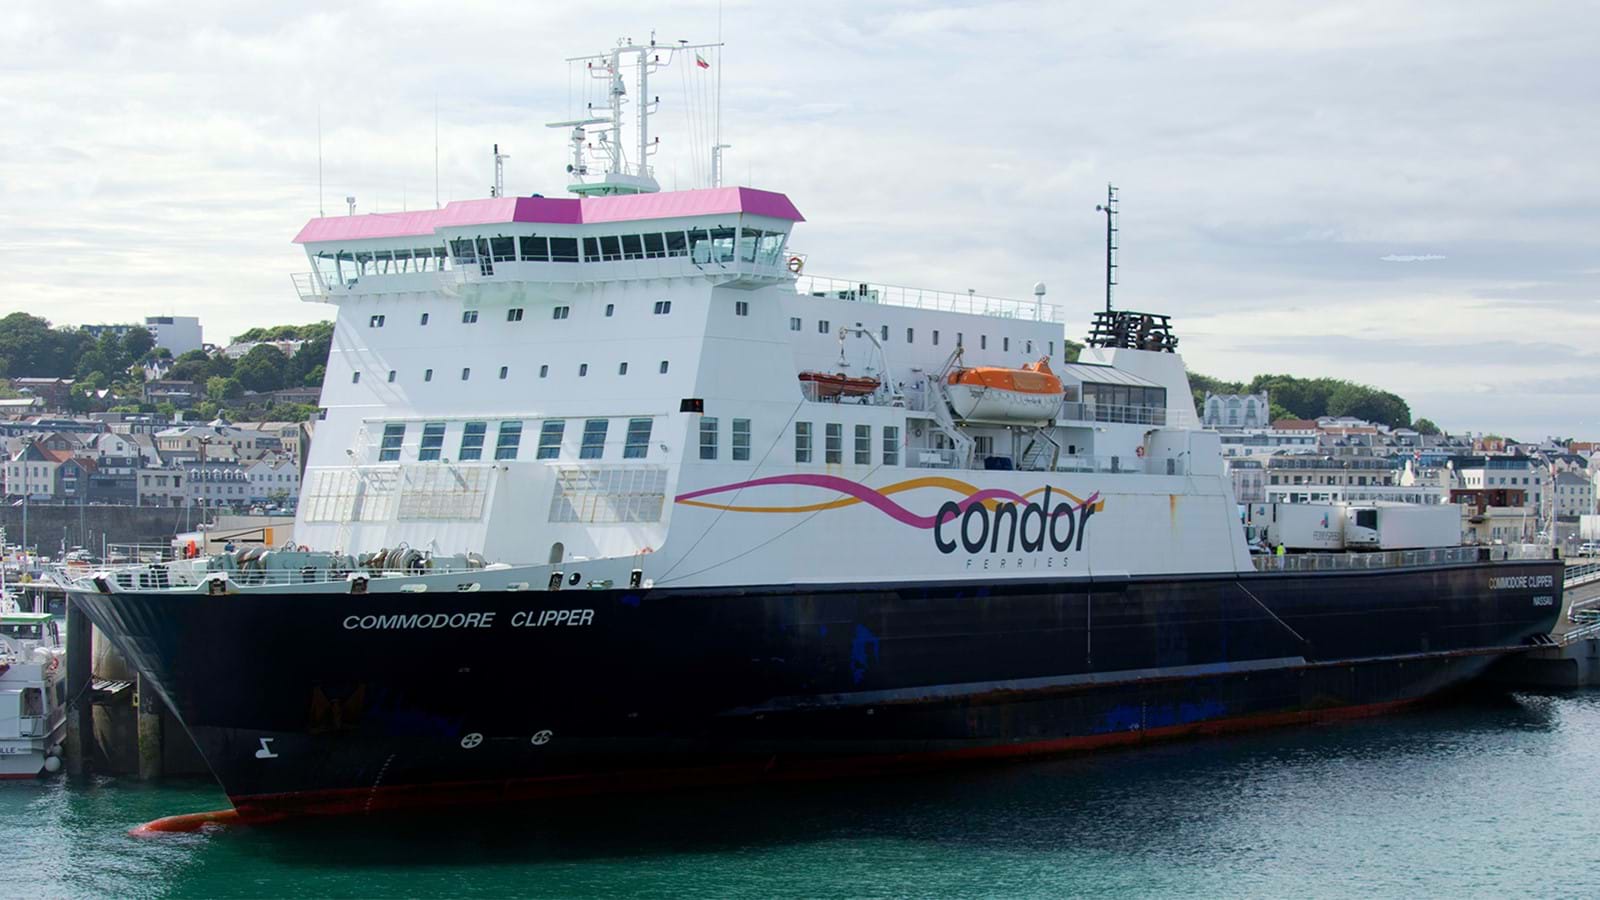 condor ferries day trips to jersey